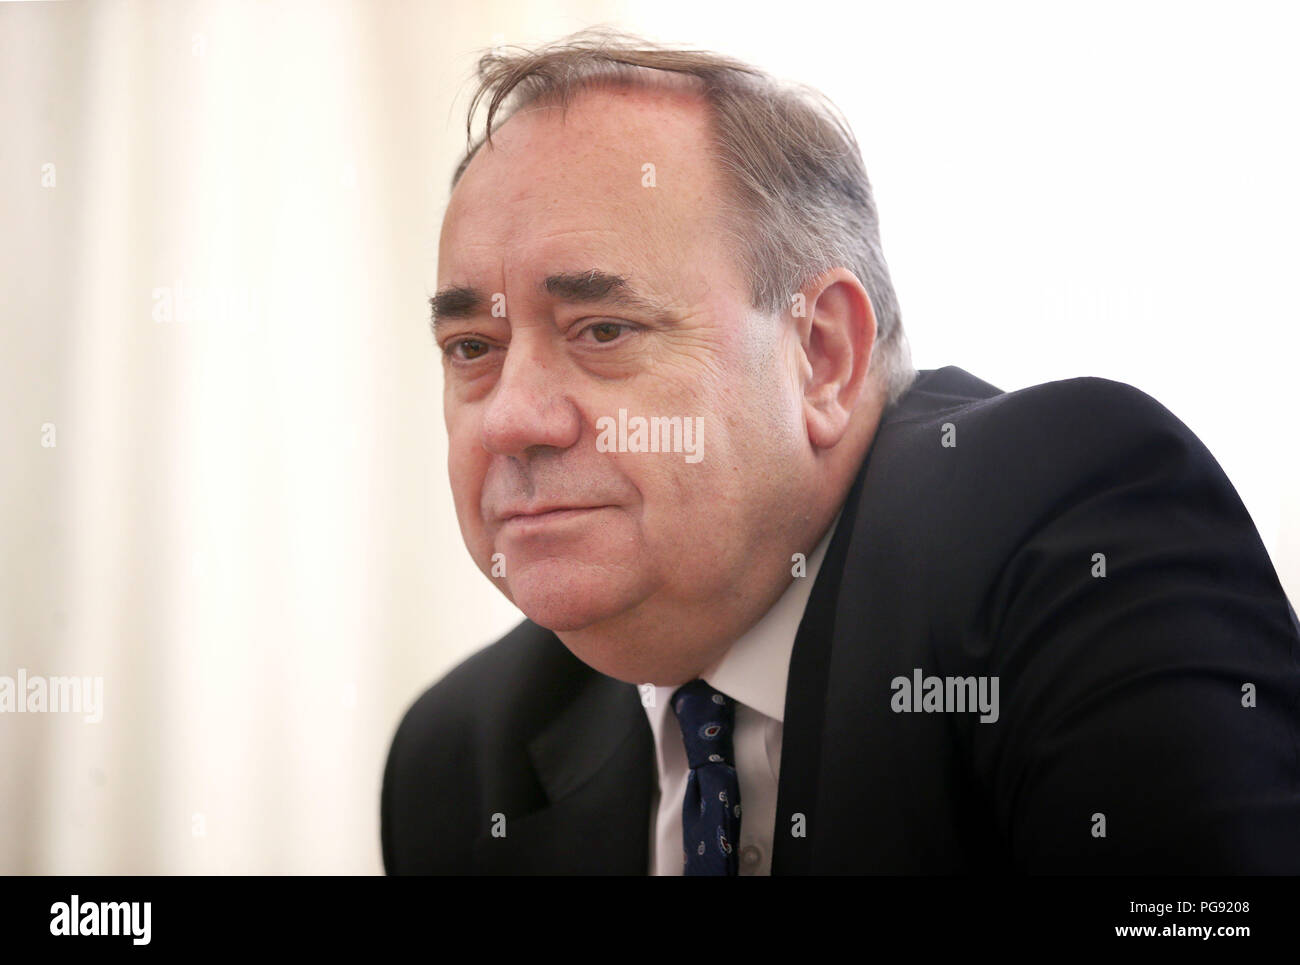 The former first minister of Scotland Alex Salmond speaking to the media at the Champany Inn in Linlithgow, West Lothian, after he launched a legal action to contest the complaints process that was activated against him following allegations about his conduct towards two staff members in 2013 - while he was in office. Stock Photo